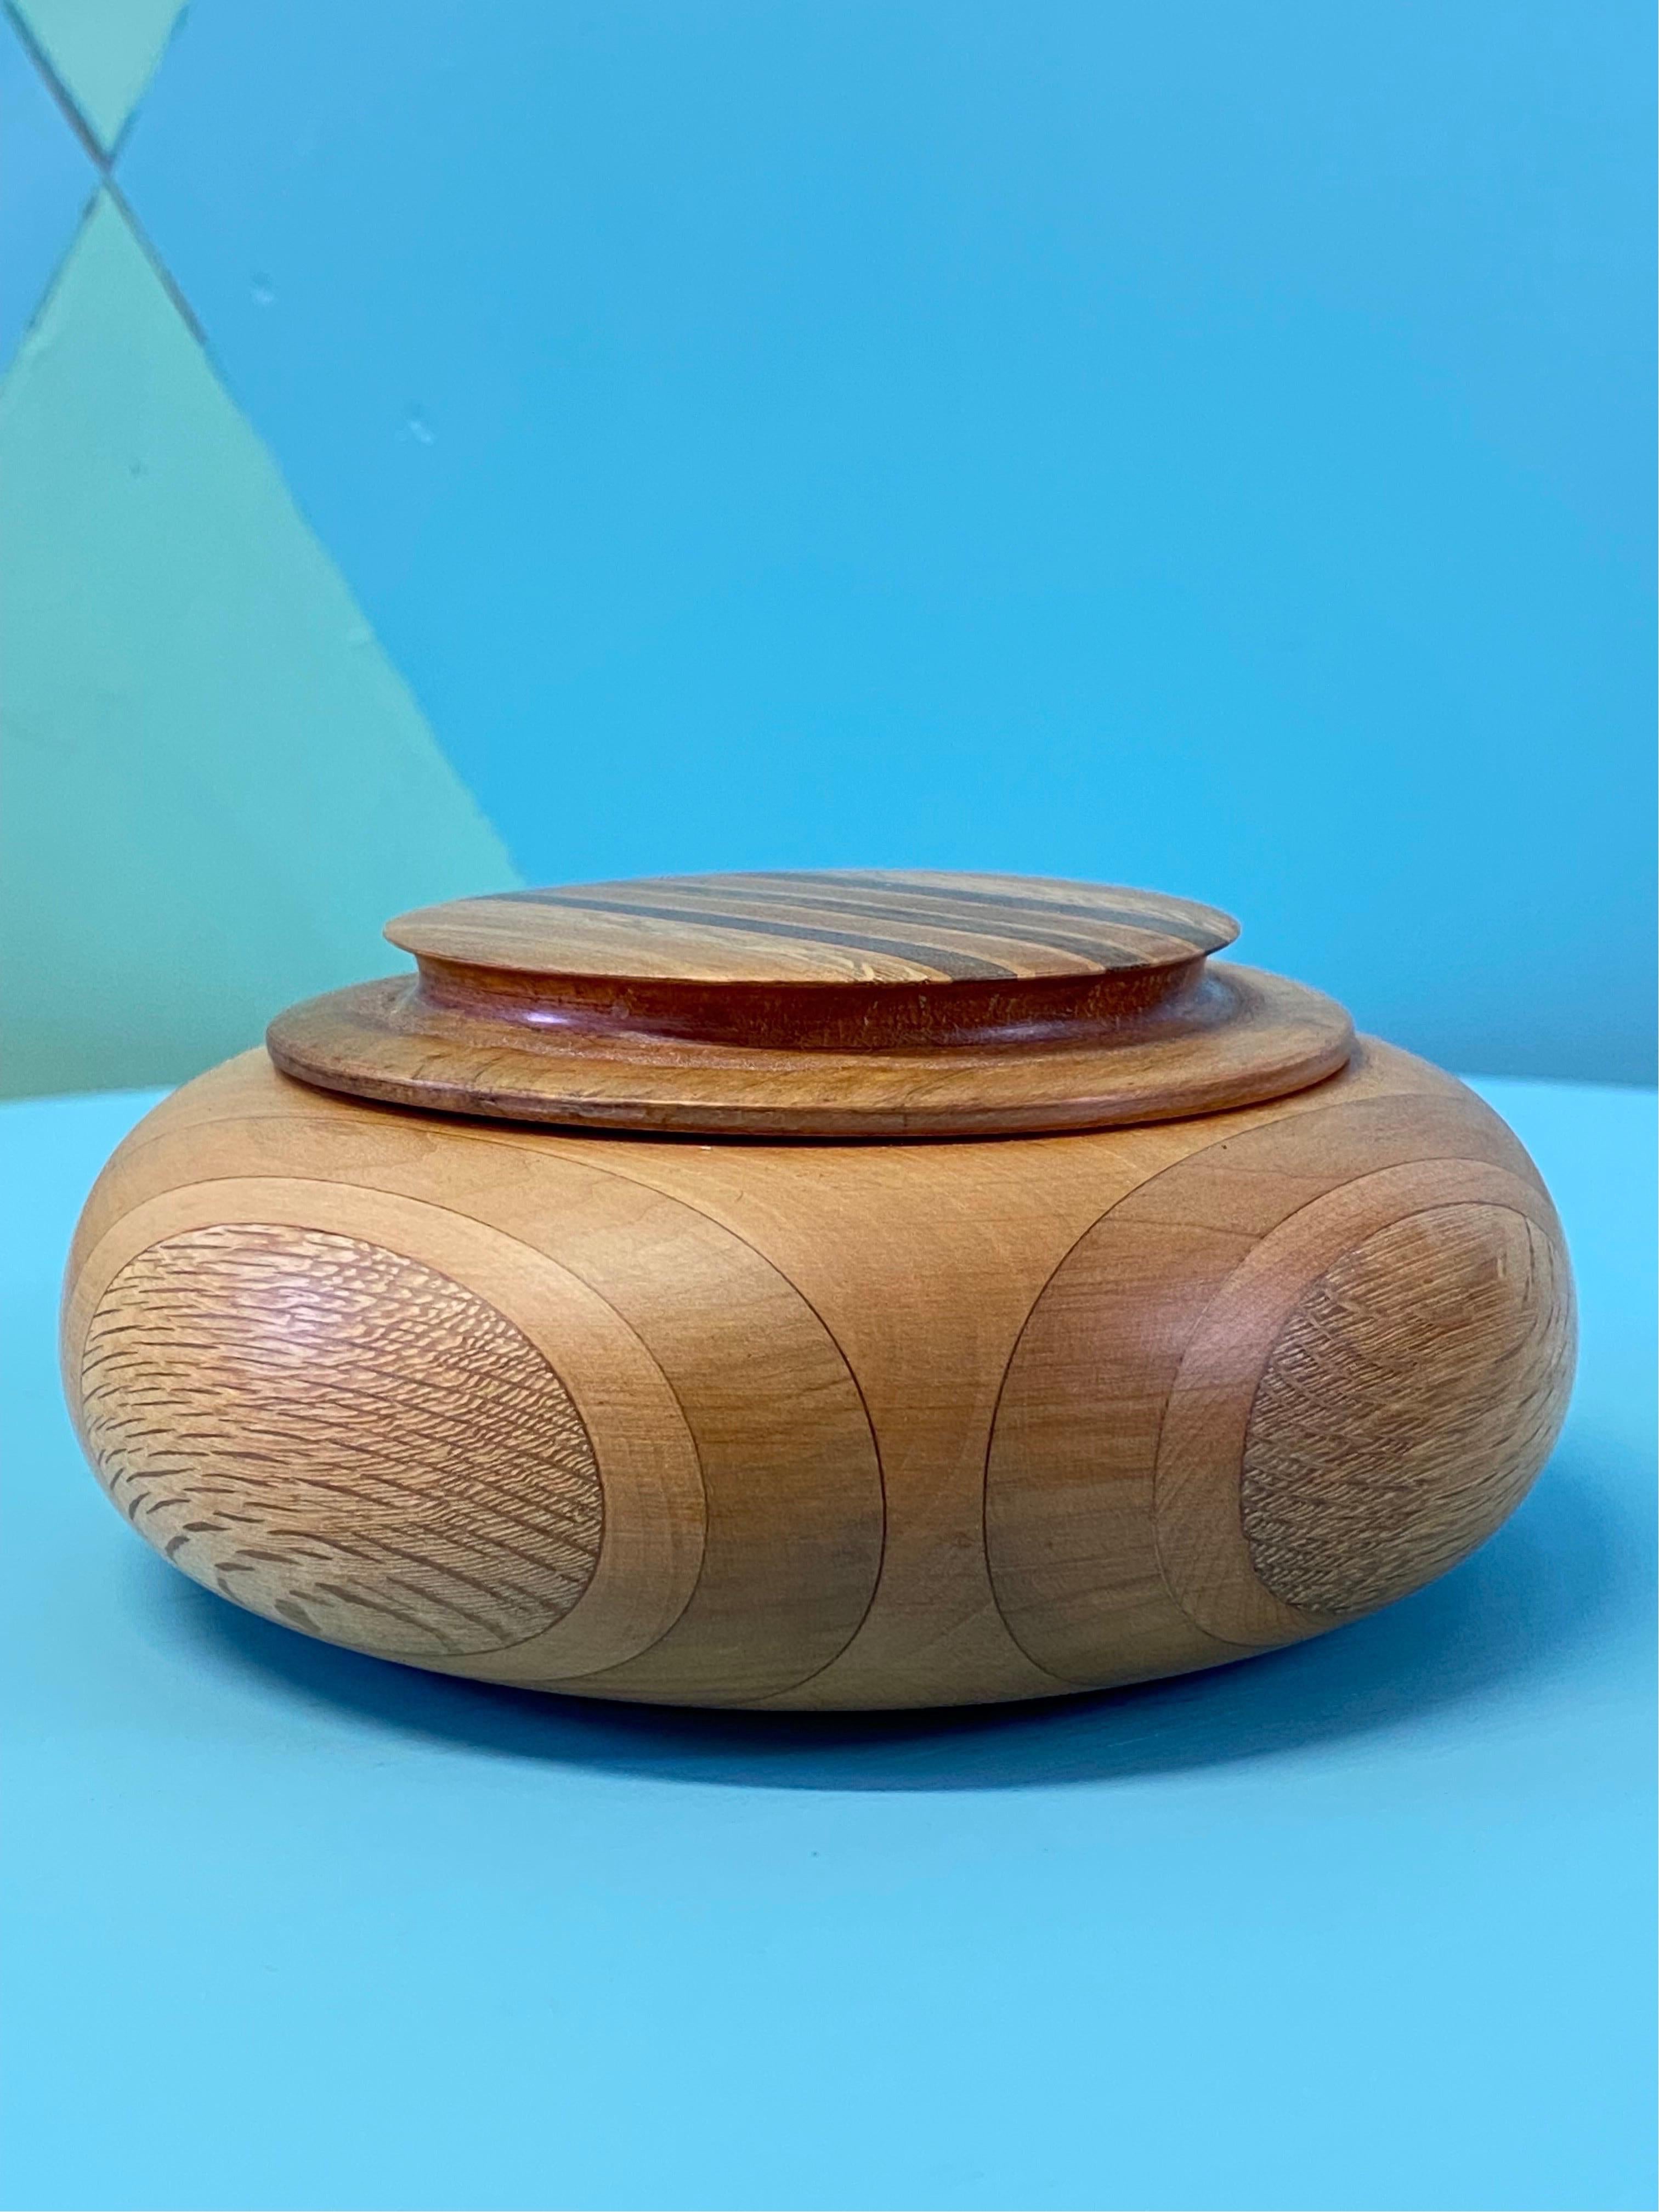 This delightful trinket box made of specimen New Zealand timbers was made in the mid 1950s. New Zealand at this time had a small but viable tourism industry, based on the country's exceptional natural attractions - majestic mountains, unique flora